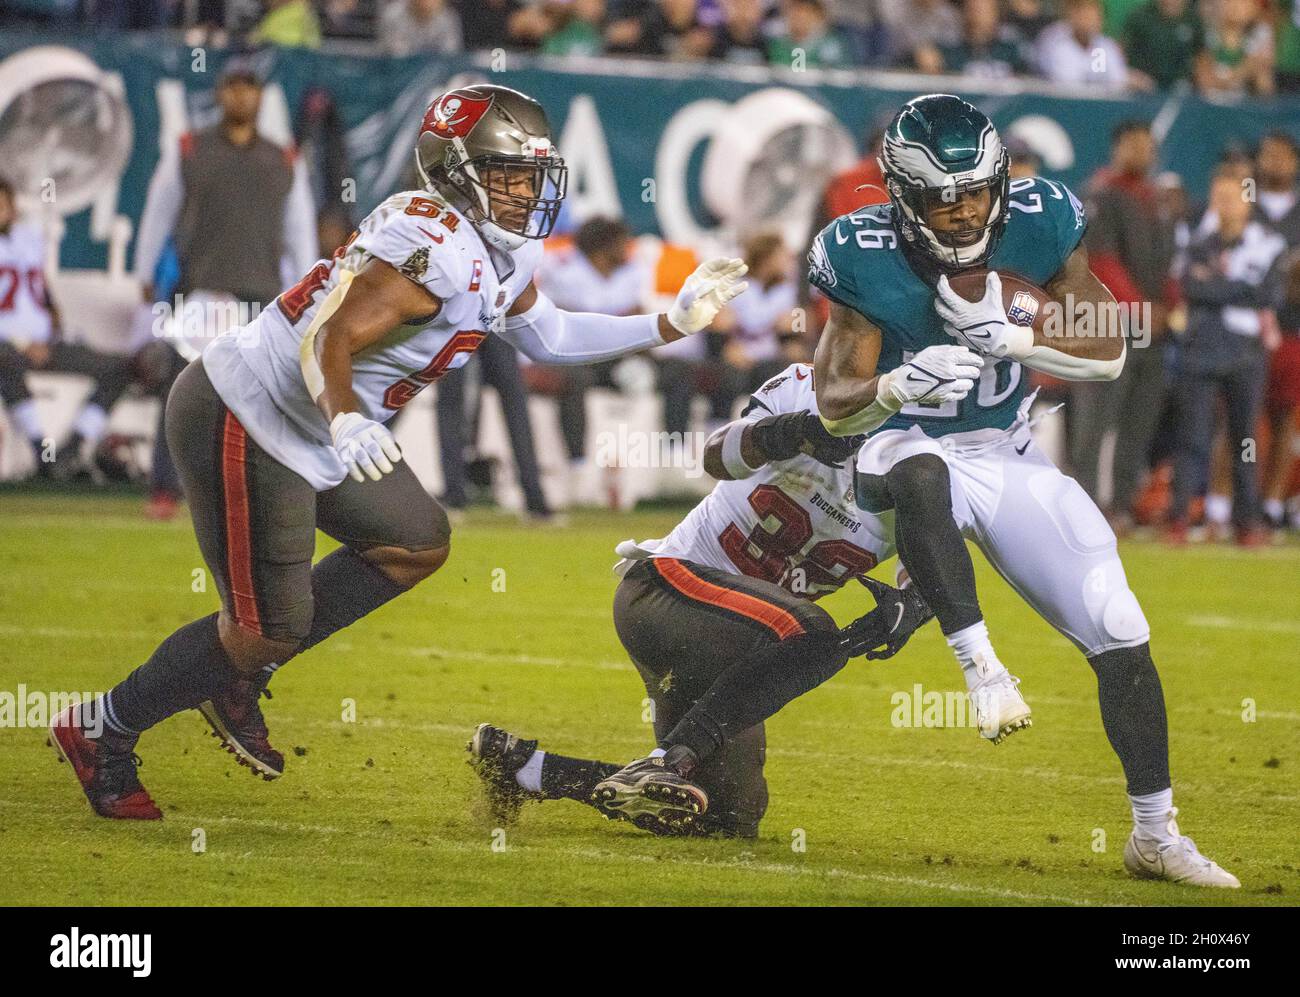 Philadelphia, Pennsylvania, USA. 14th Oct, 2021. As Tampa Bay linebacker KEVIN MINTER, #51, closes in, Eagles running back MILES SANDERS, #26, breaks free of Tampa Bay safety MIKE EDWARDS, #32, during an NFL football game between the Philadelphia Eagles and the Tampa Bay Buccaneers at Lincoln Financial Field in Philadelphia, Pennsylvania. Tampa Bay won 28-22. (Credit Image: © Jim Z. Rider/ZUMA Press Wire) Stock Photo